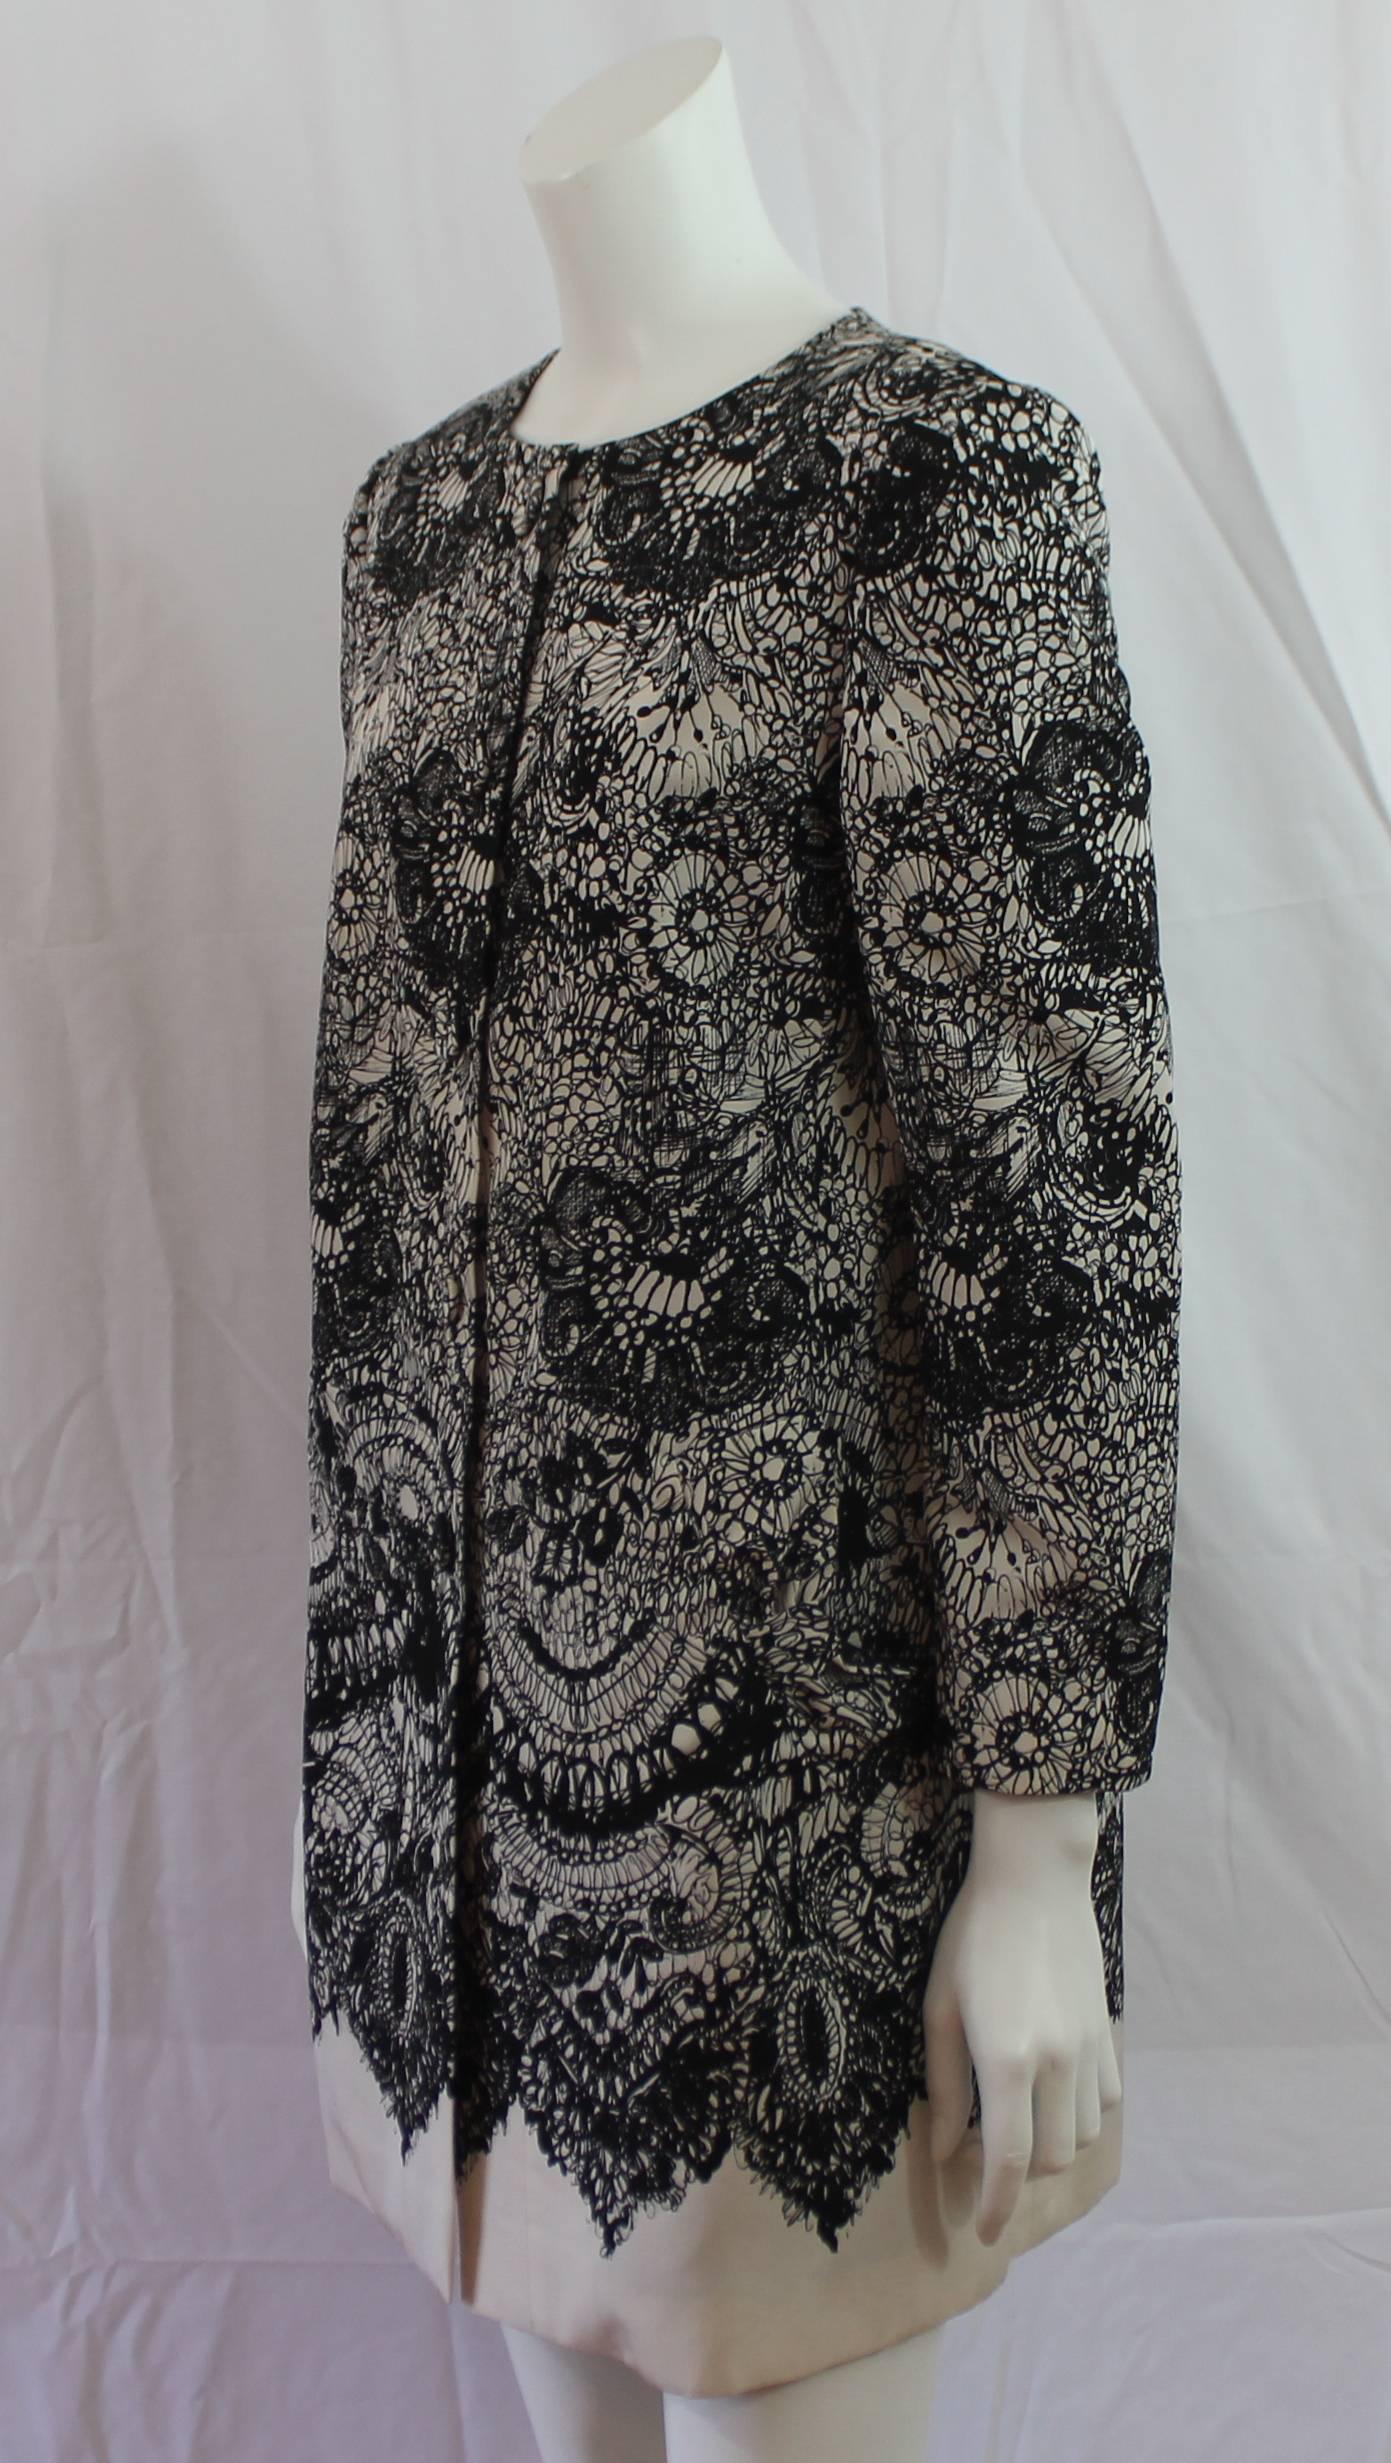 Prada Black & White Lace Printed Silk Taffeta Coat - 42. This coat is a twist on a classic look and features snap buttons and bow detail pockets. It is in excellent condition.

Measurements:
Bust- 40